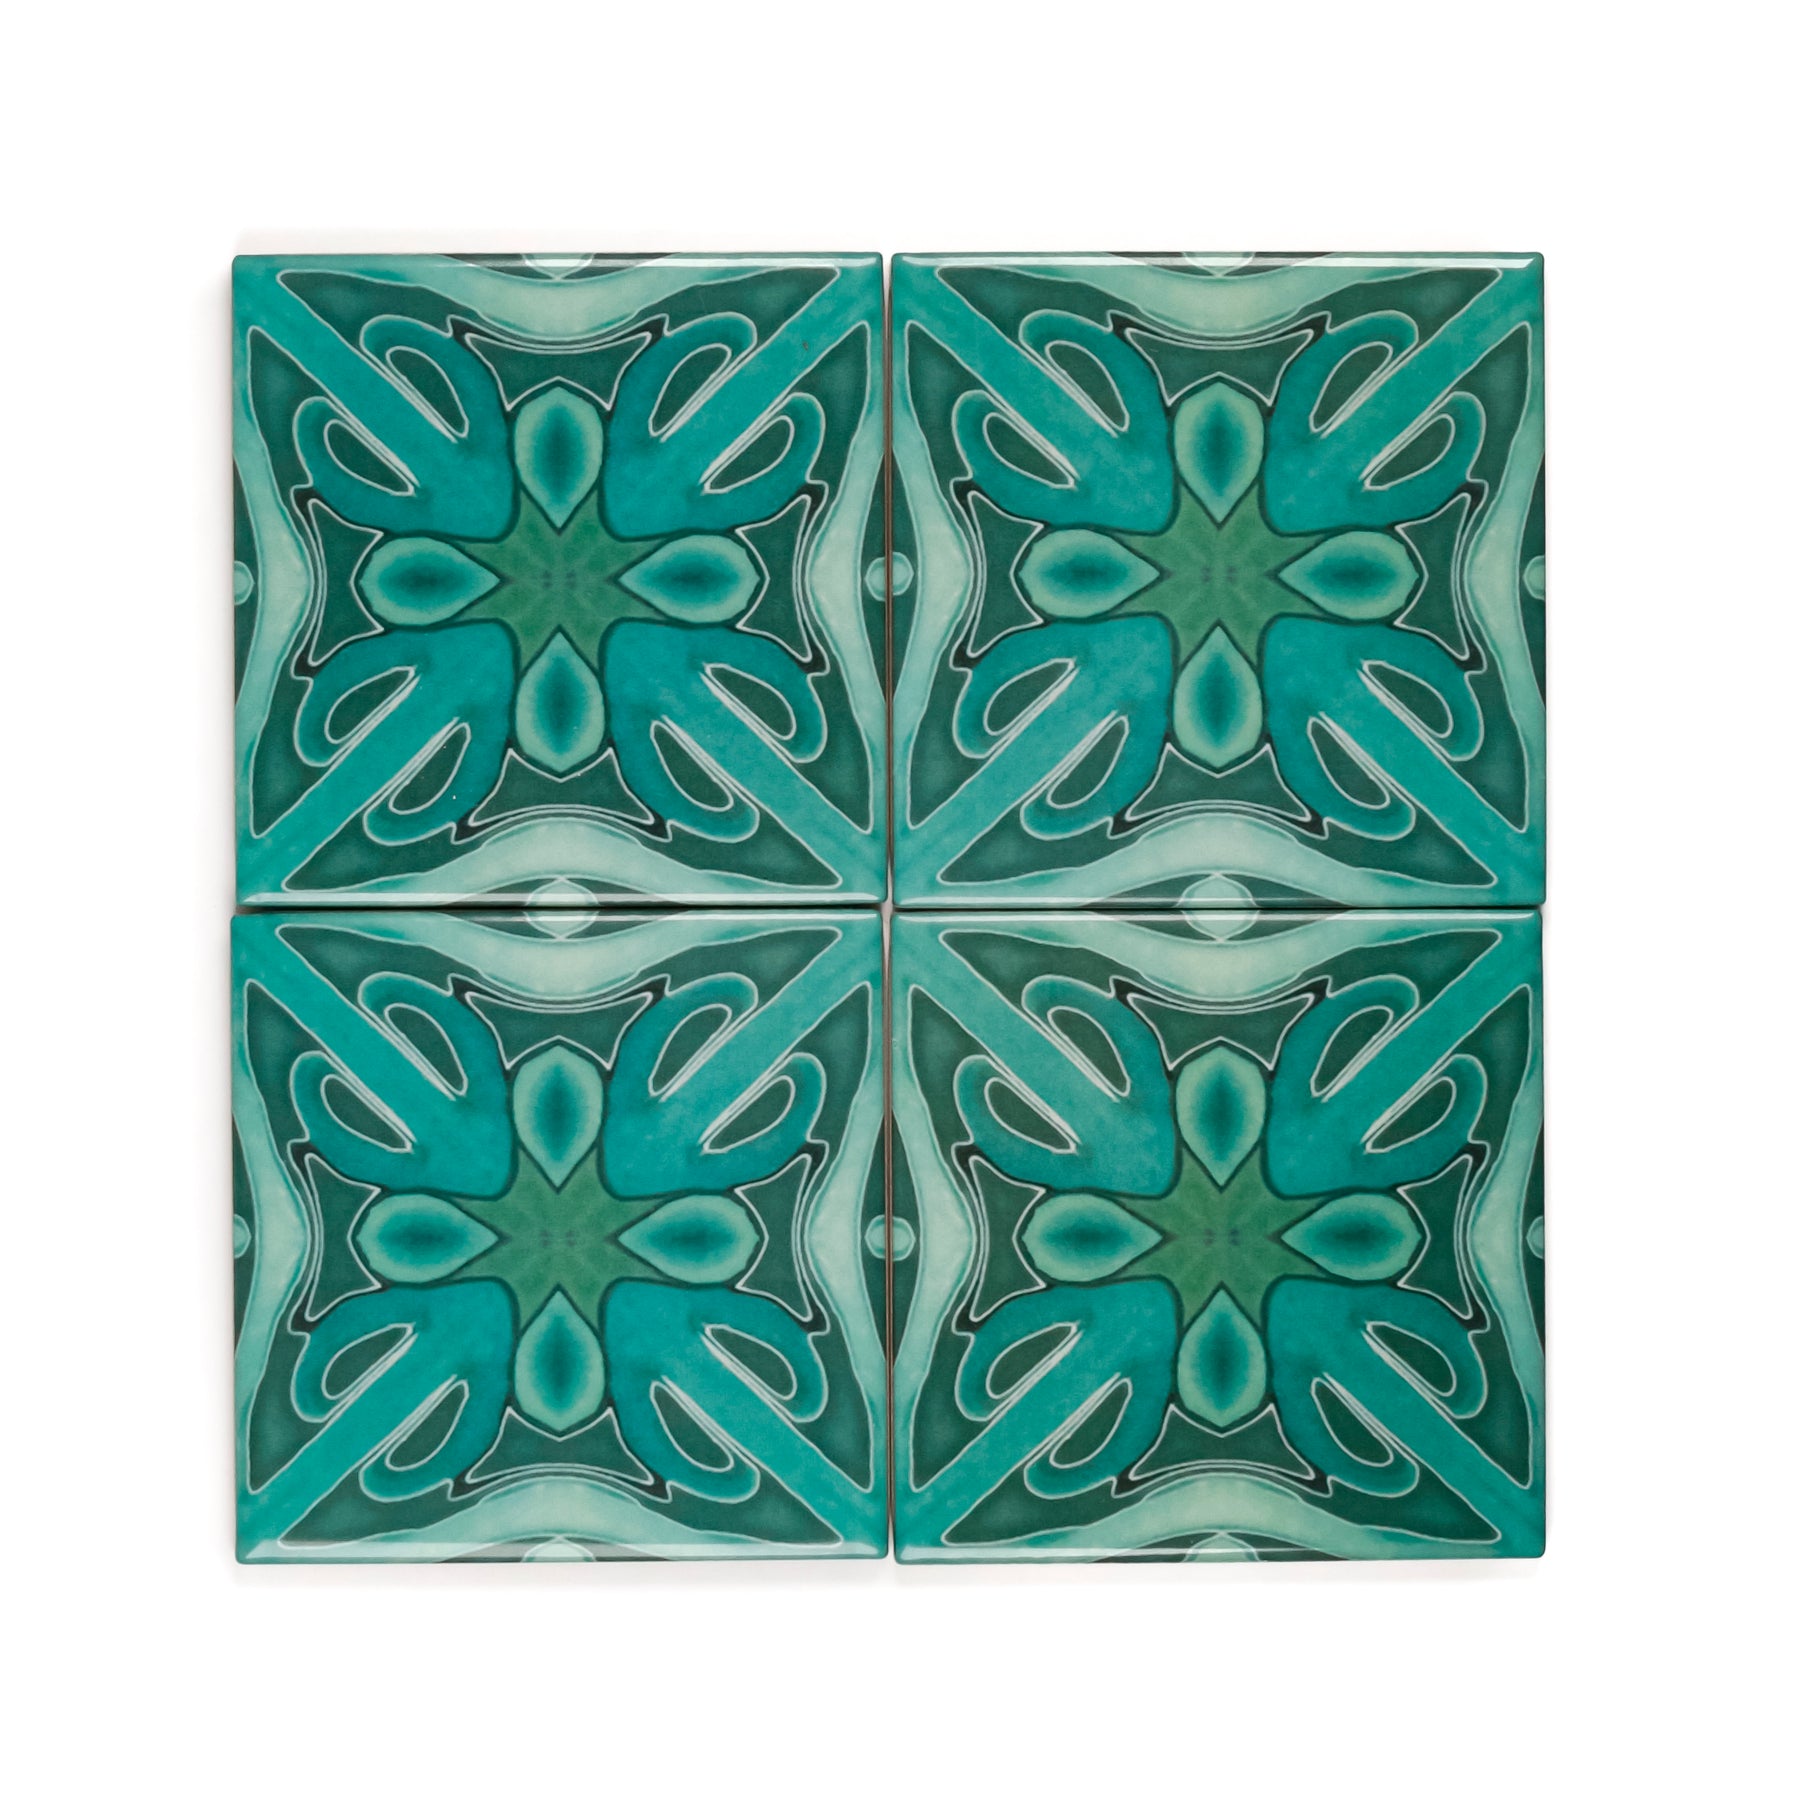 Malachite Twining' Art Deco tiles - FIRED INK Version – DoodlePippin